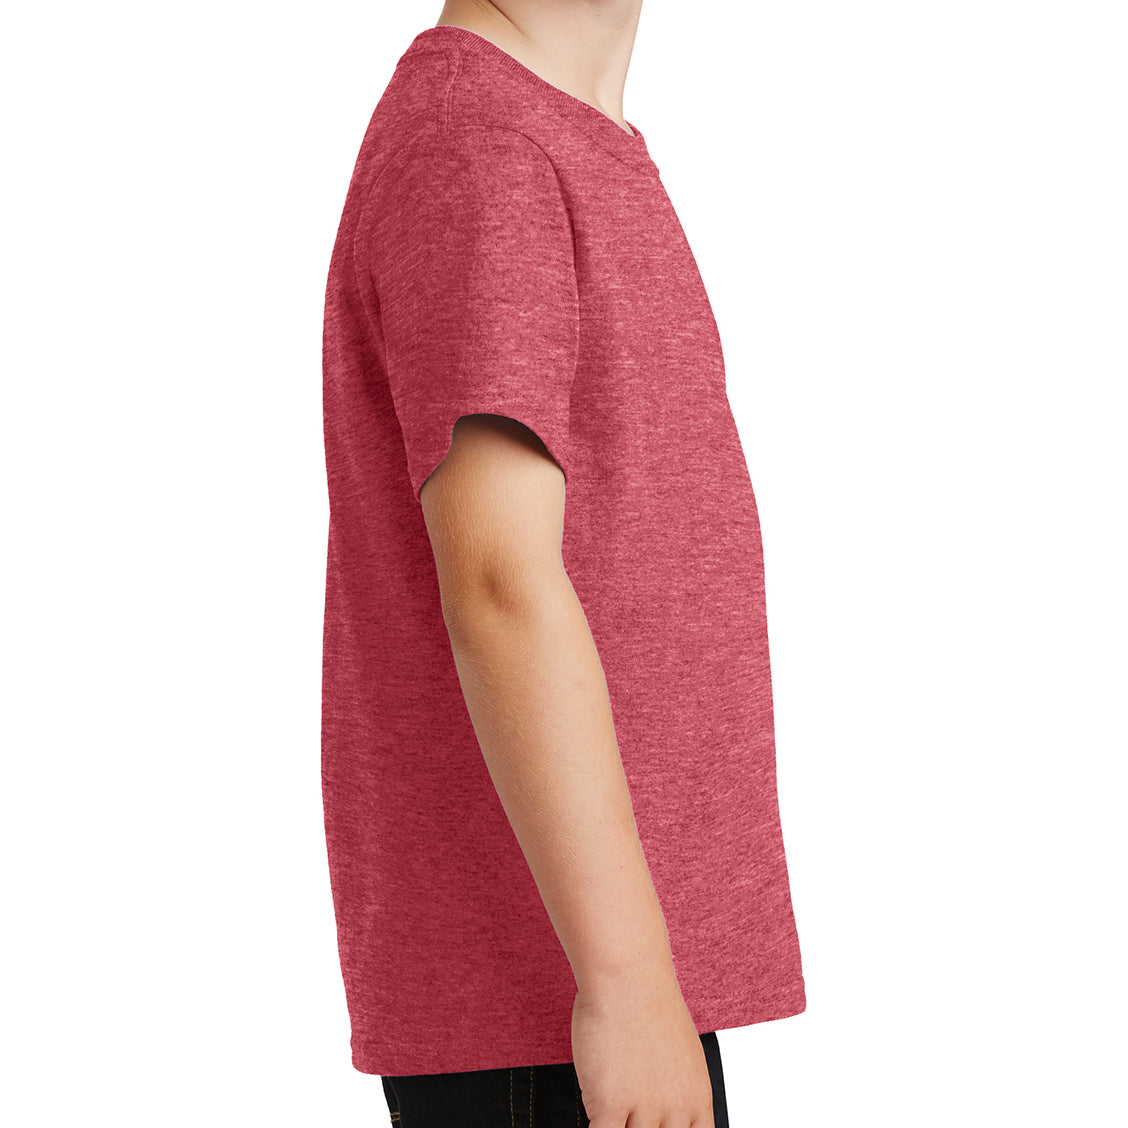 Youth Core Cotton Tee - Heather Red